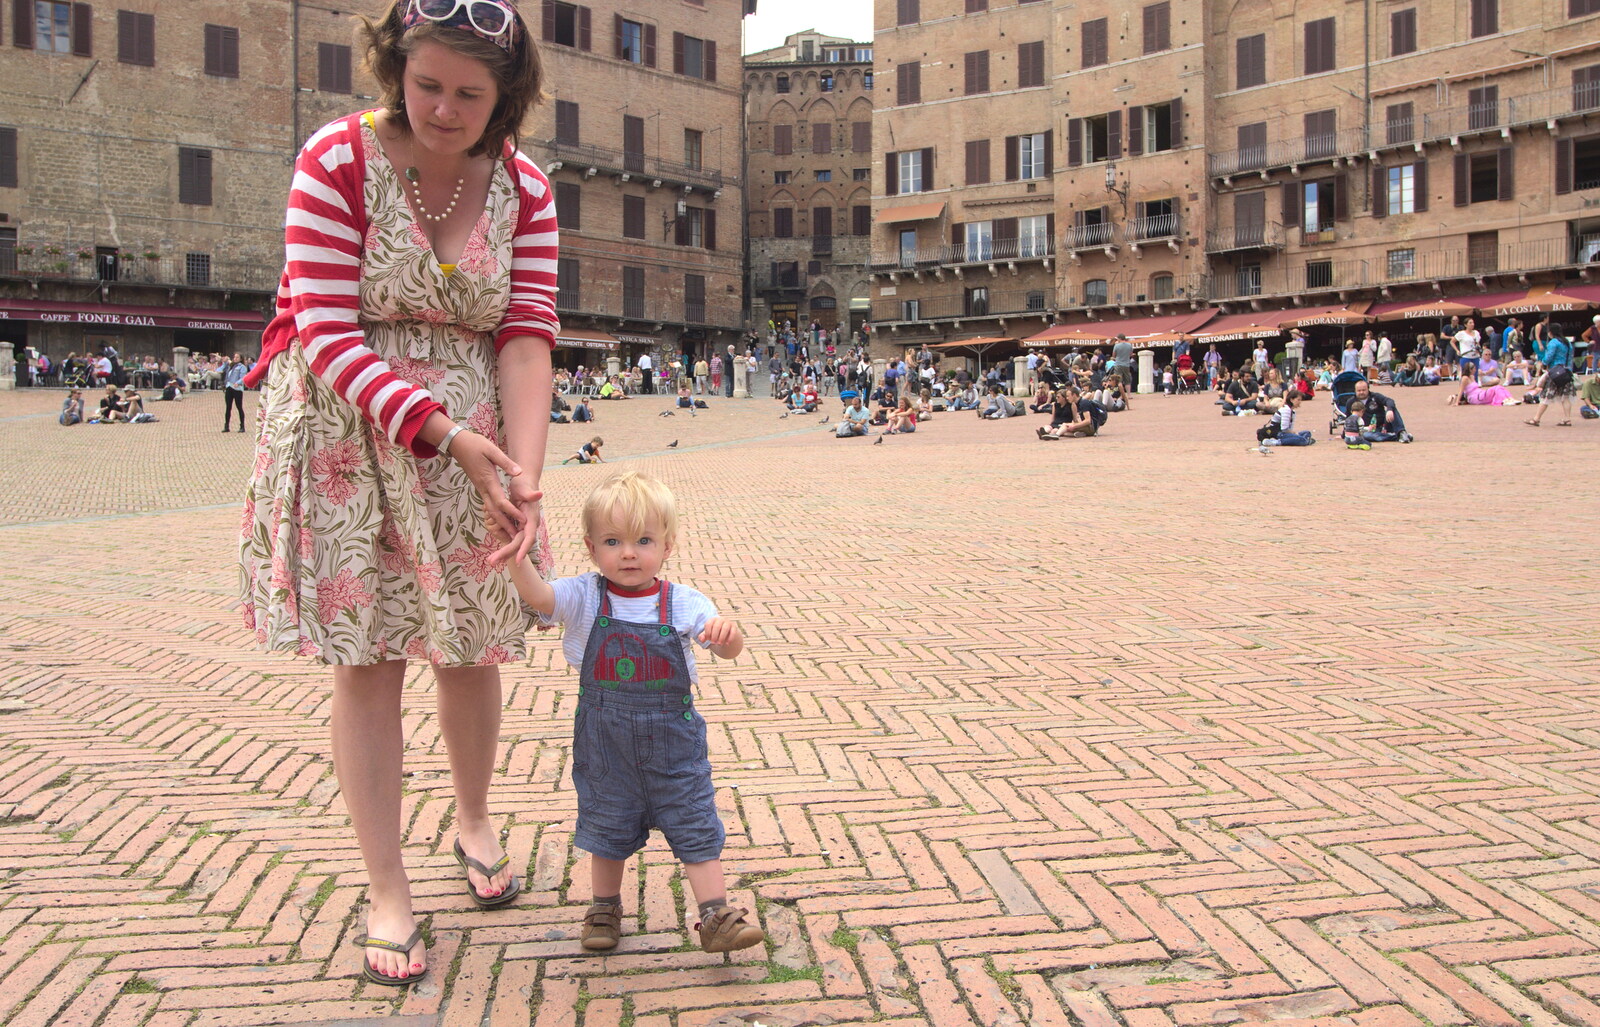 A Tuscan Winery and a Trip to Siena, Tuscany, Italy - 10th June 2013: Isobel and Gabes walk around the main square